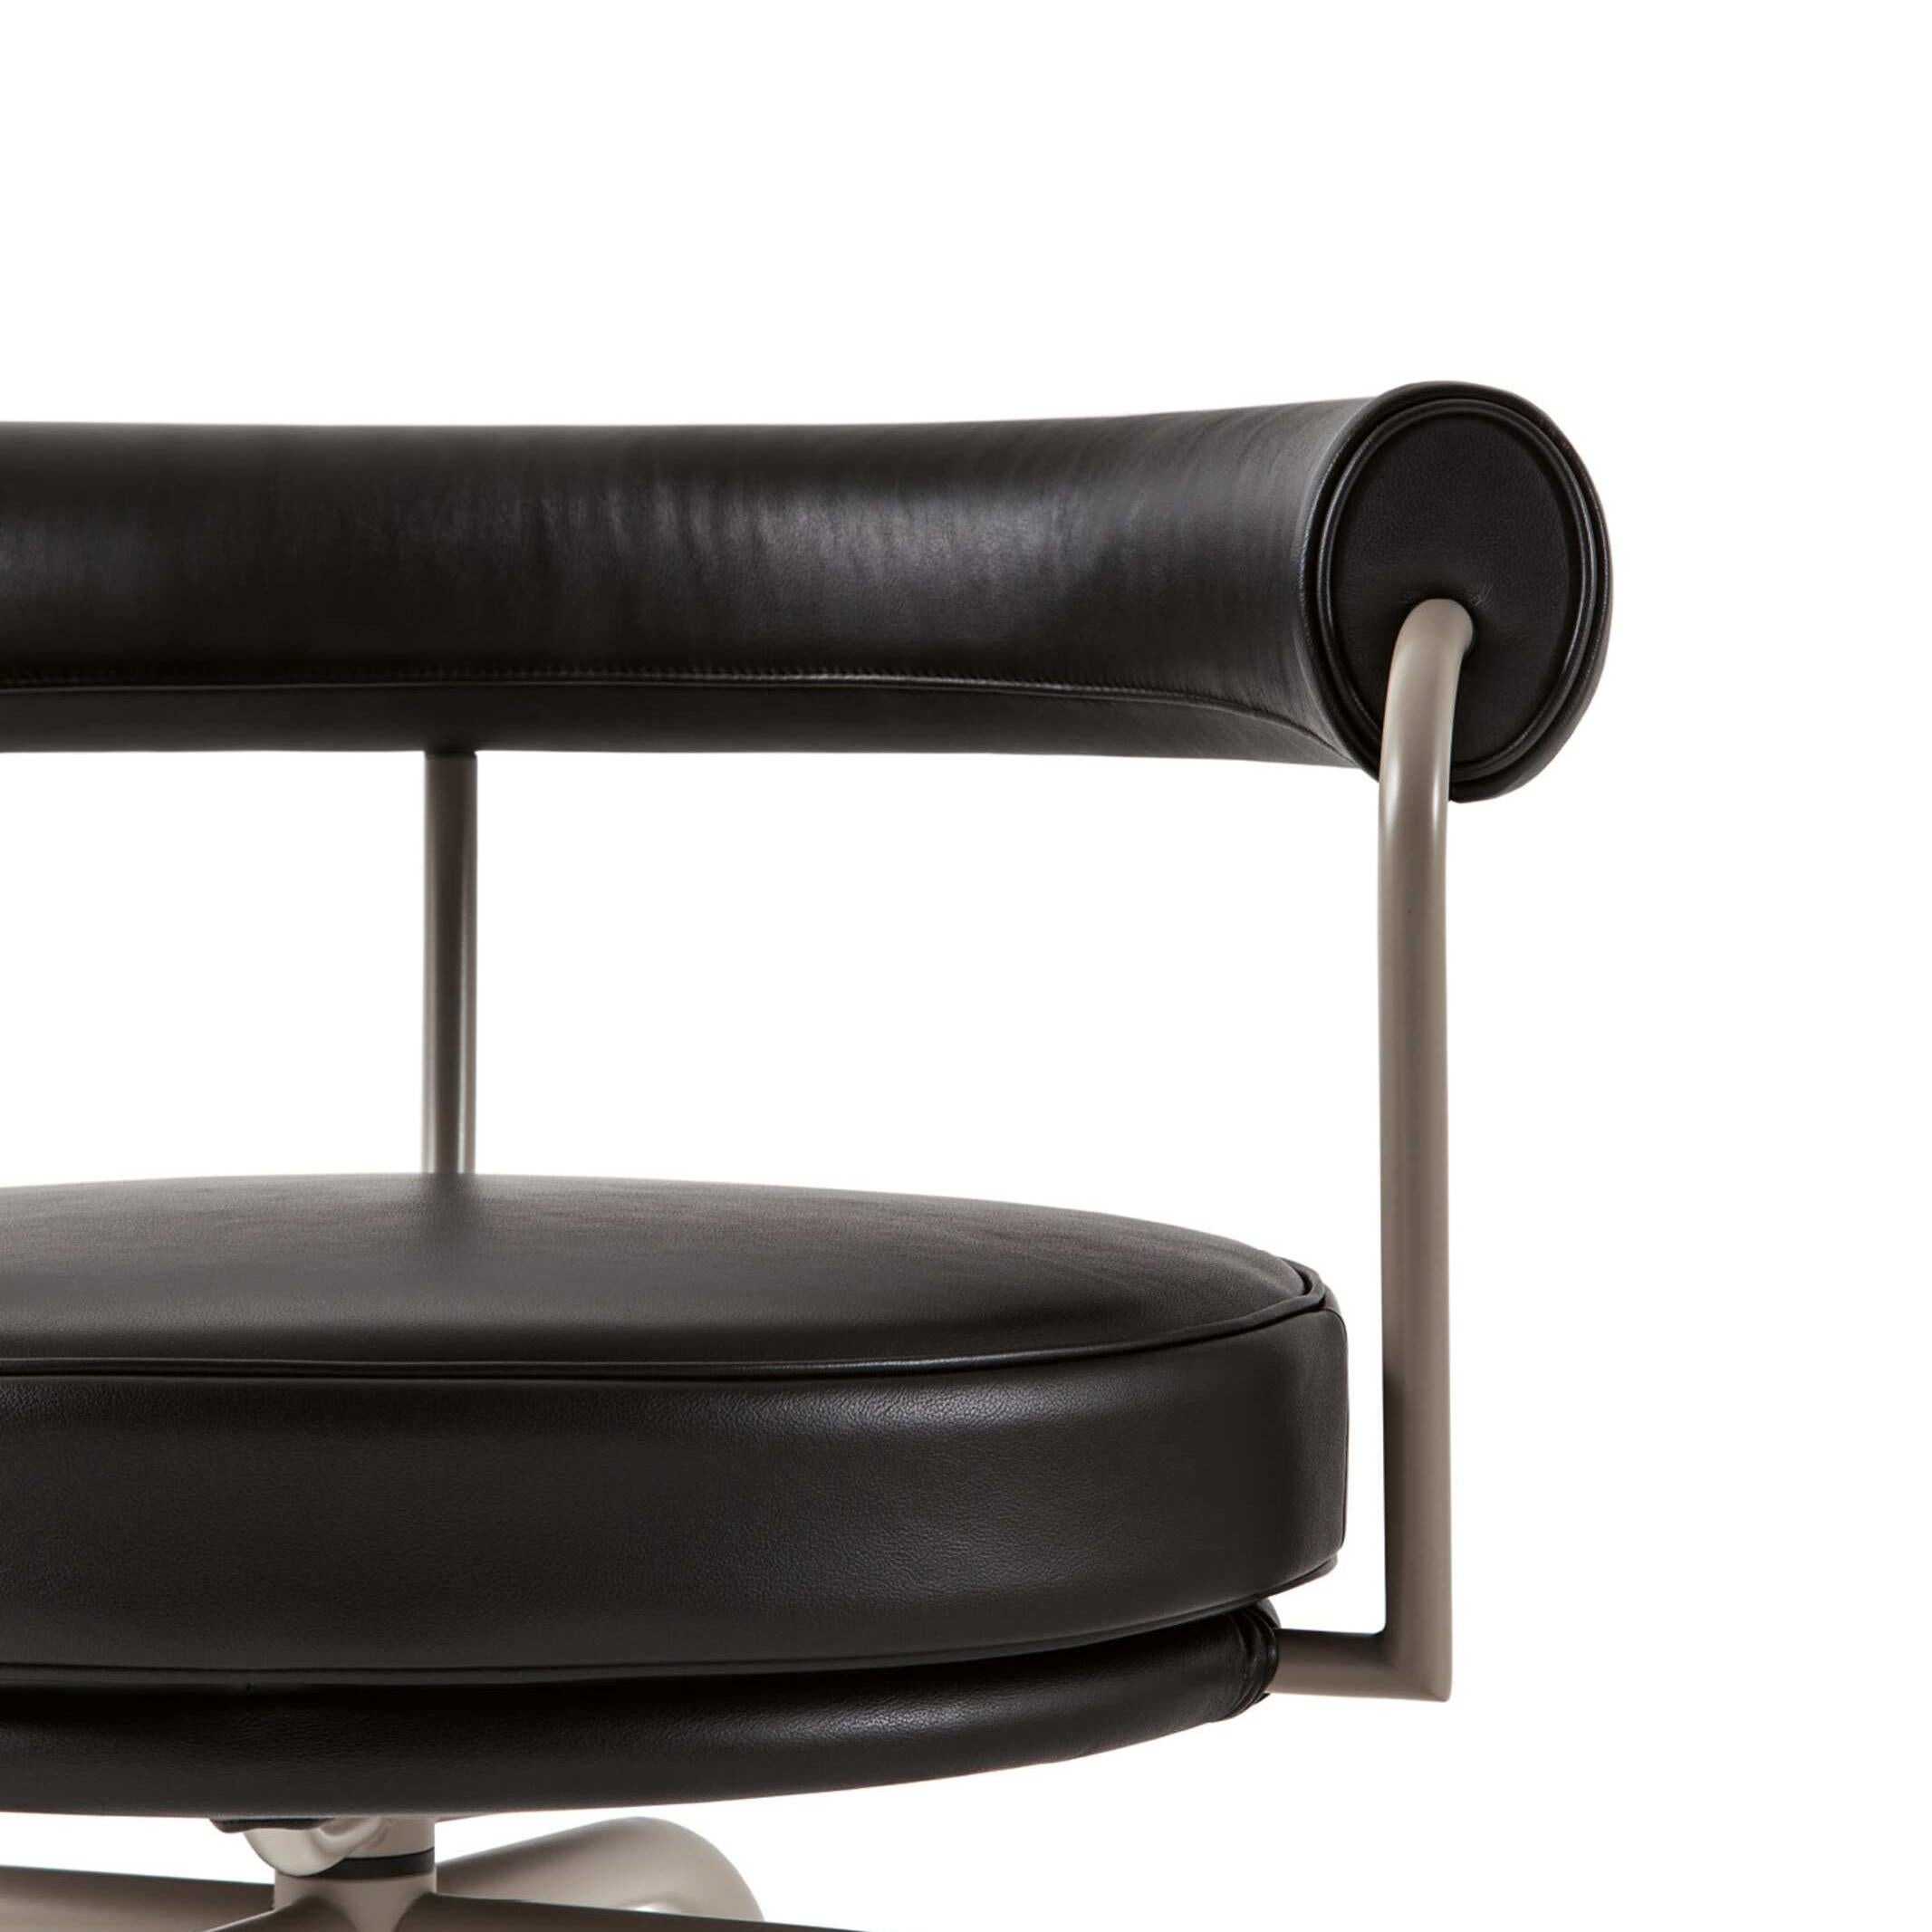 Black leather upholstered LC7 chair designed by Charlotte Perriand in 1927. Relaunched in 1978.
Manufactured by Cassina in Italy.

Designed by Charlotte Perriand and part of the LC collection by Le Corbusier, Pierre Jeanneret and Charlotte